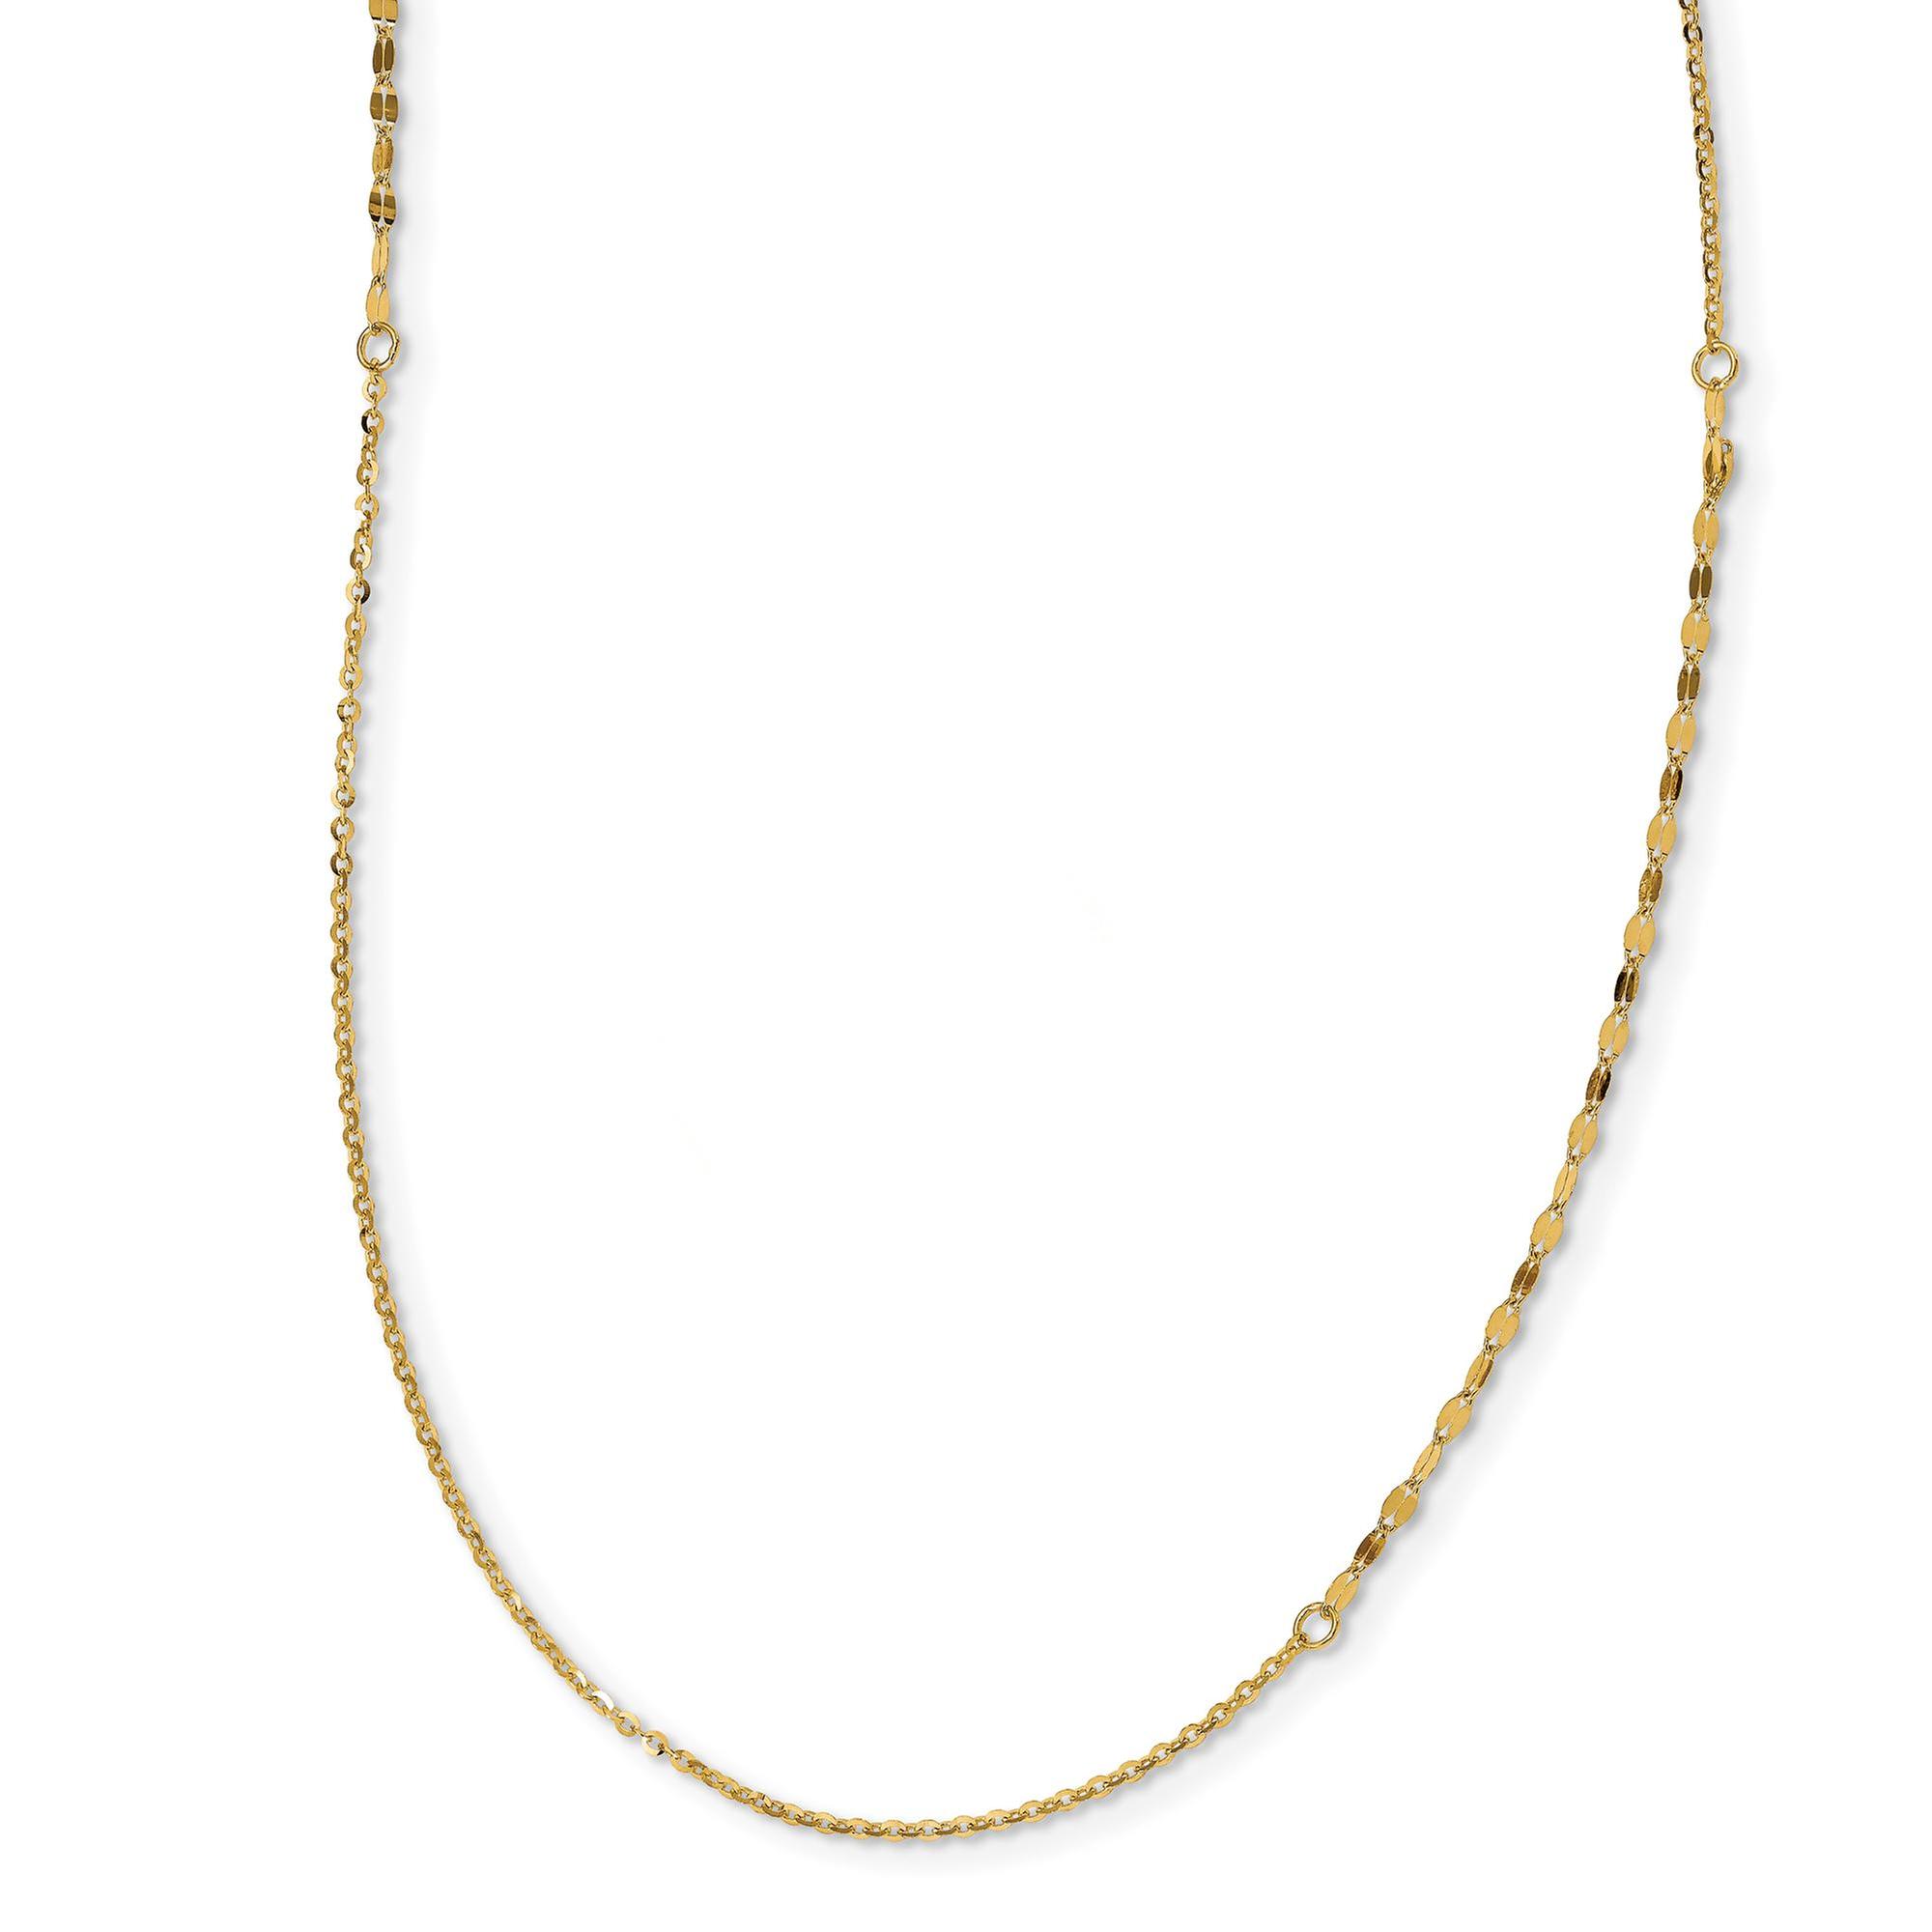 Paradise Jewelers 10K Yellow Gold 1.2mm Franco Chain Necklace Lobster Clasp 